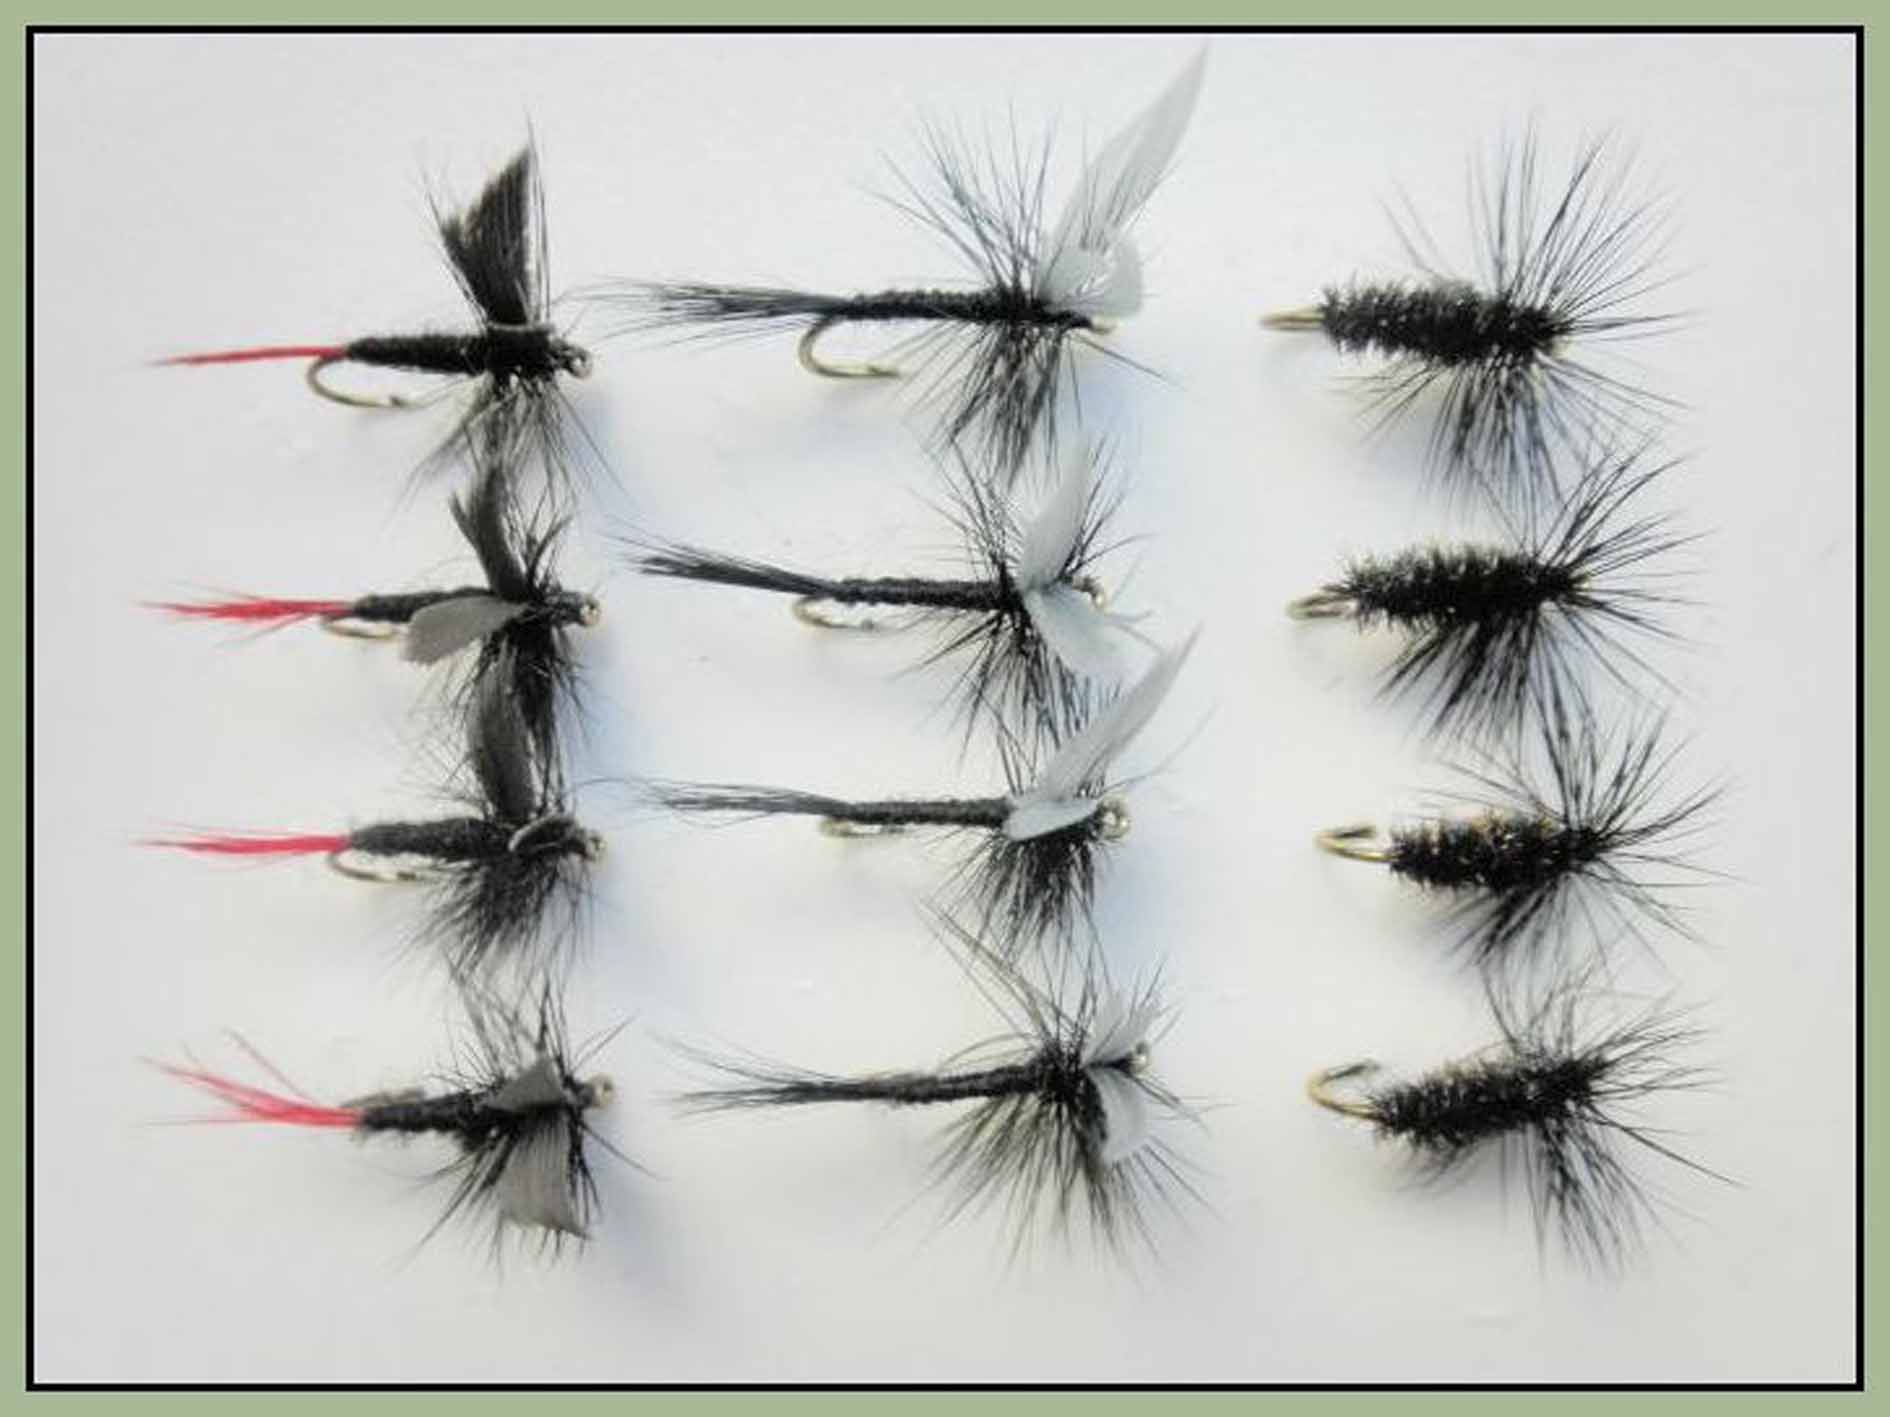 https://www.troutflies.co.uk/image/cache/catalog/Dry%20Batches/NP251-1890x1417.jpg